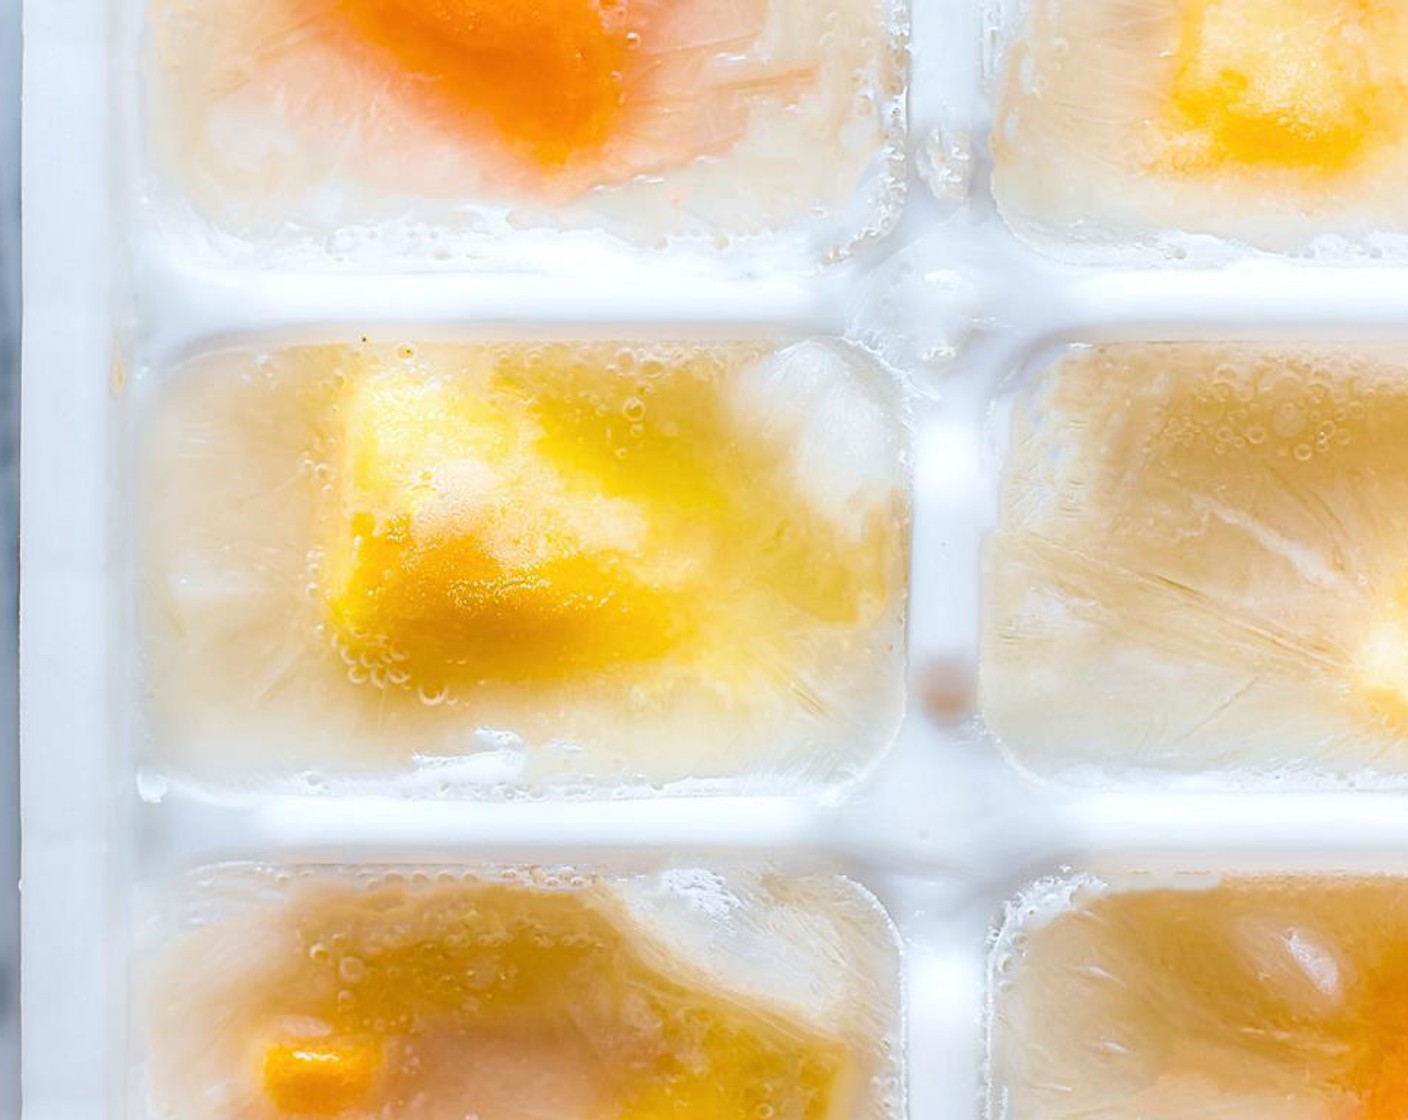 step 1 In a small ice tray, pour your Coconut Milk (3/4 cup) into the ice tray cubes. Place your Mango (1/2 cup) inside the milk cubes.